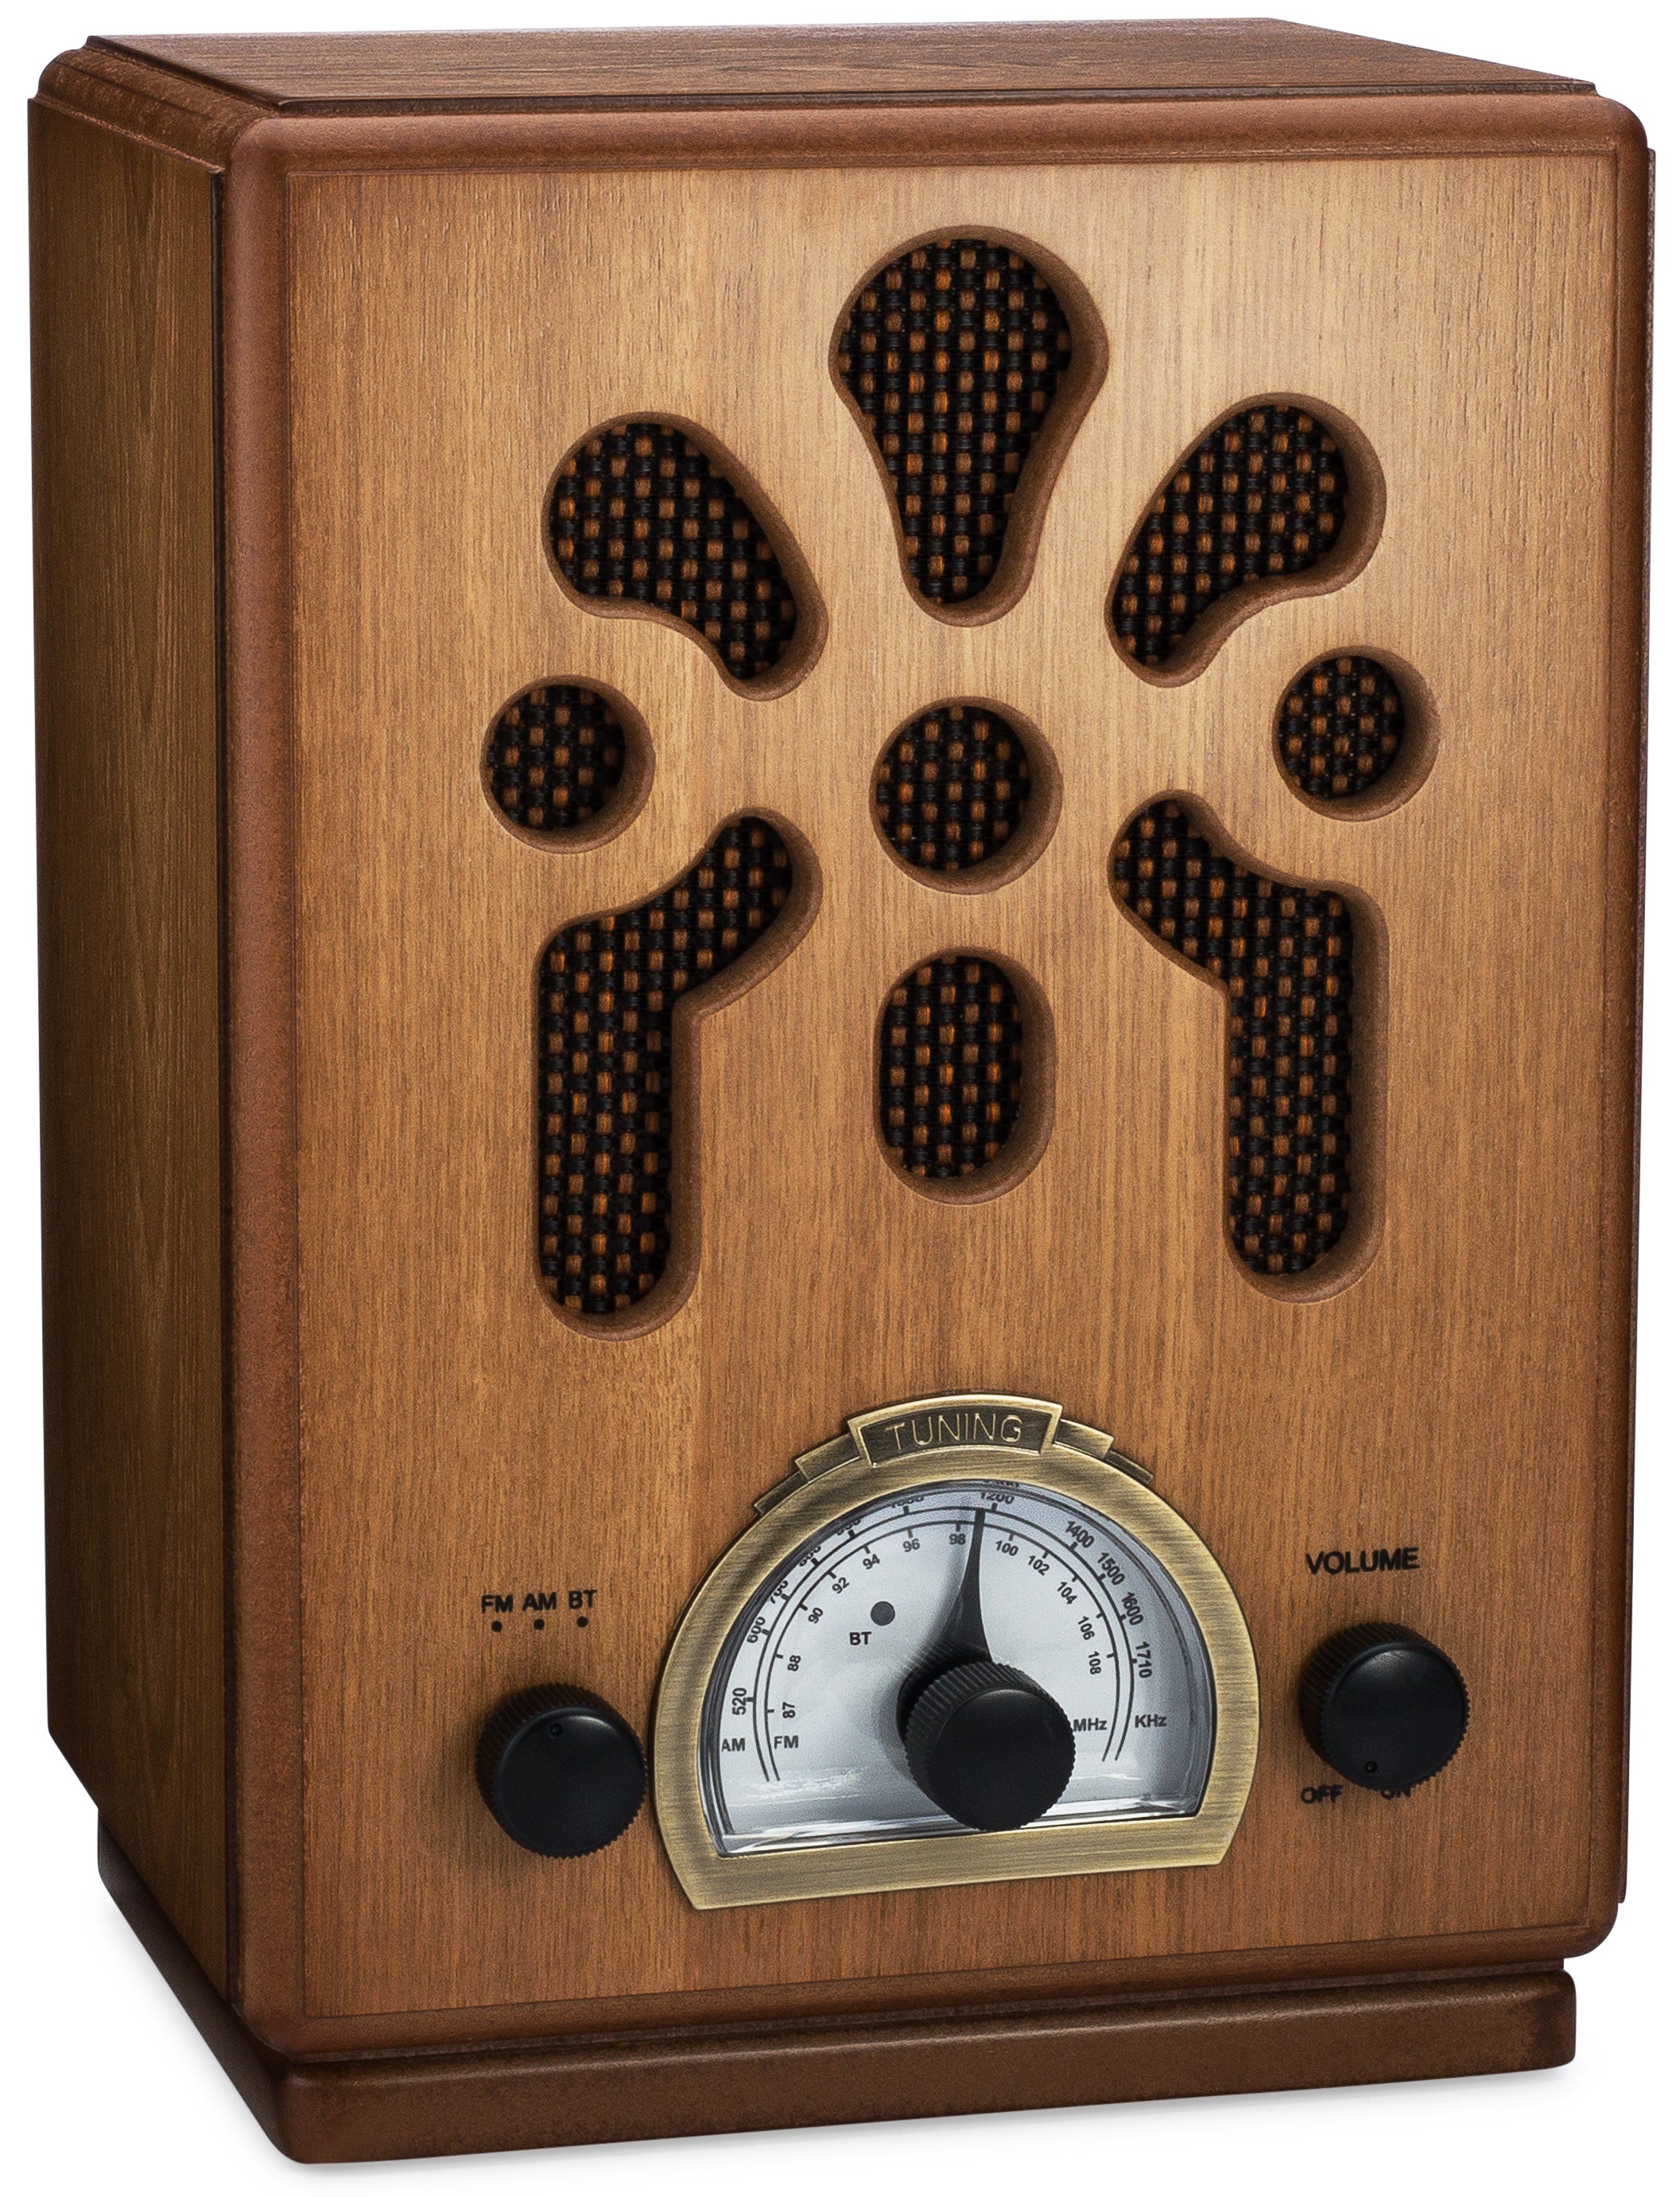 Classic Vintage Retro Style AM/FM Radio with Bluetooth (Model VR43) –  ClearClick